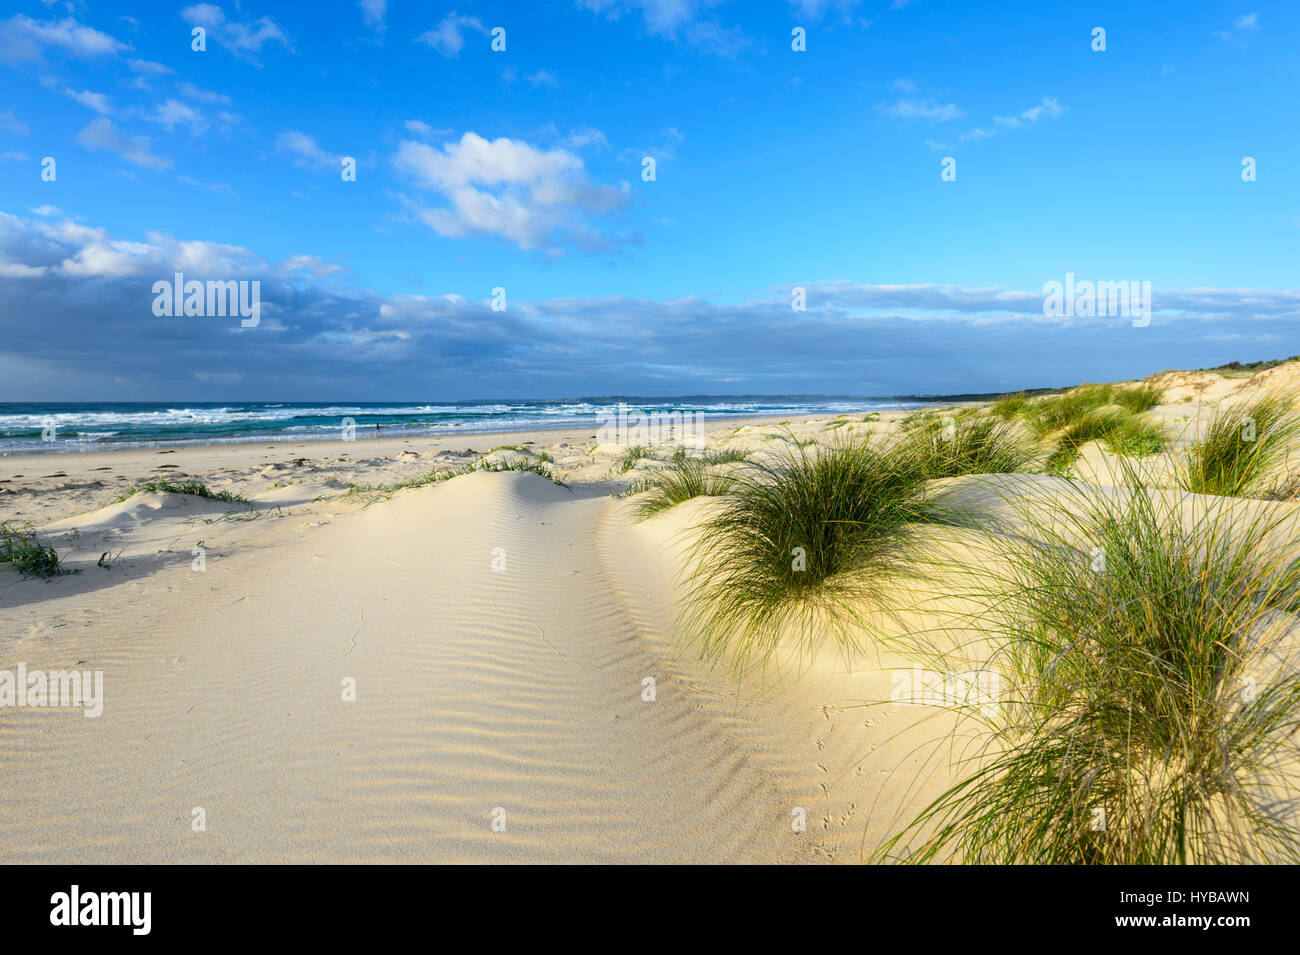 Picturesque sand dunes and grass tufts at Conjola Beach, Shoalhaven, South Coast, New South Wales, NSW, Australia Stock Photo